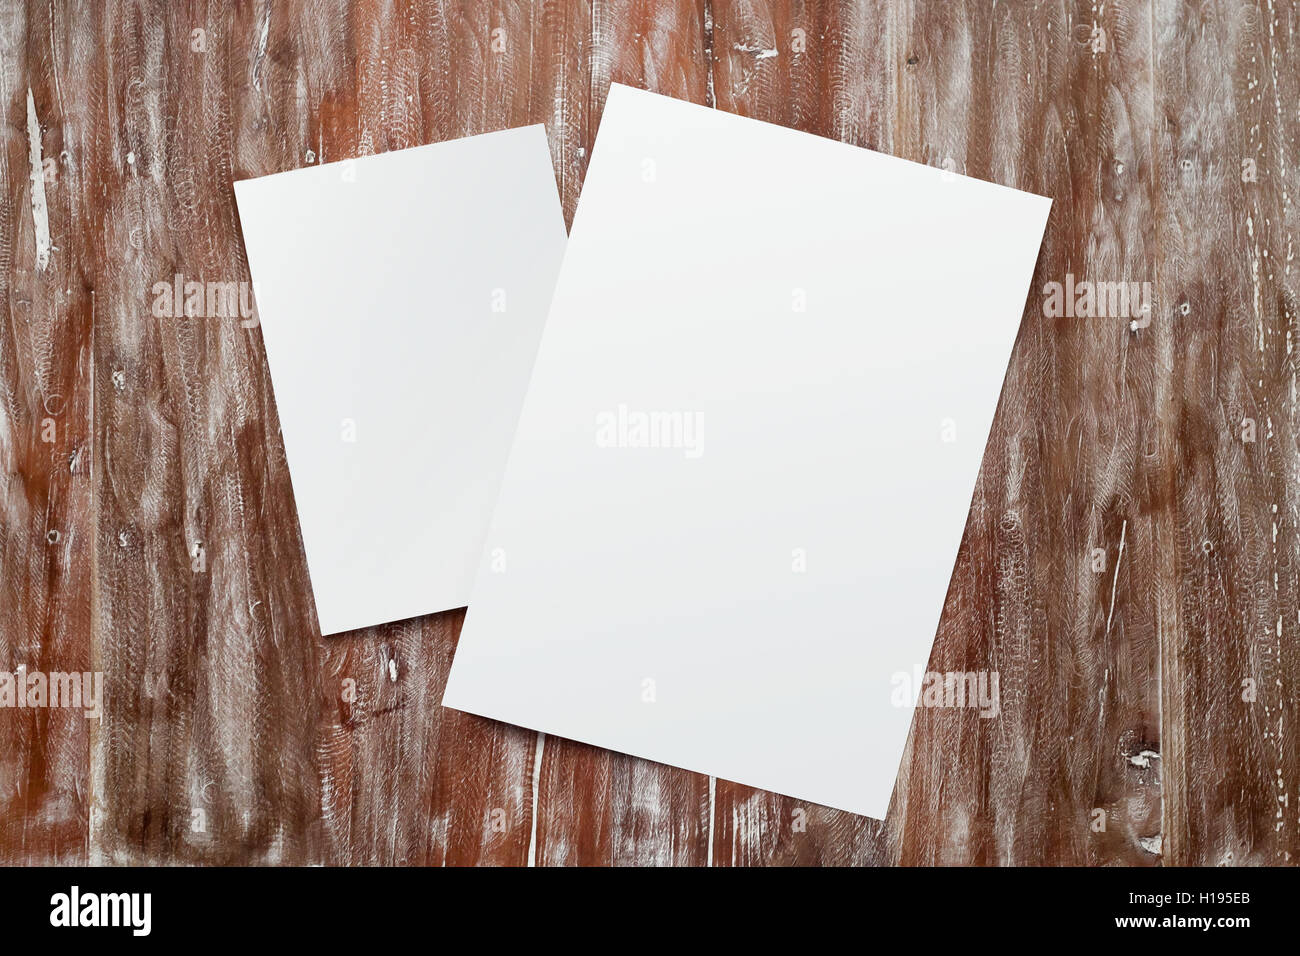 Closeup Two Blank White Paper Sheet Mockup Natural Wood Table Background. Empty Canvas Painted Brown Desk Stock Photo